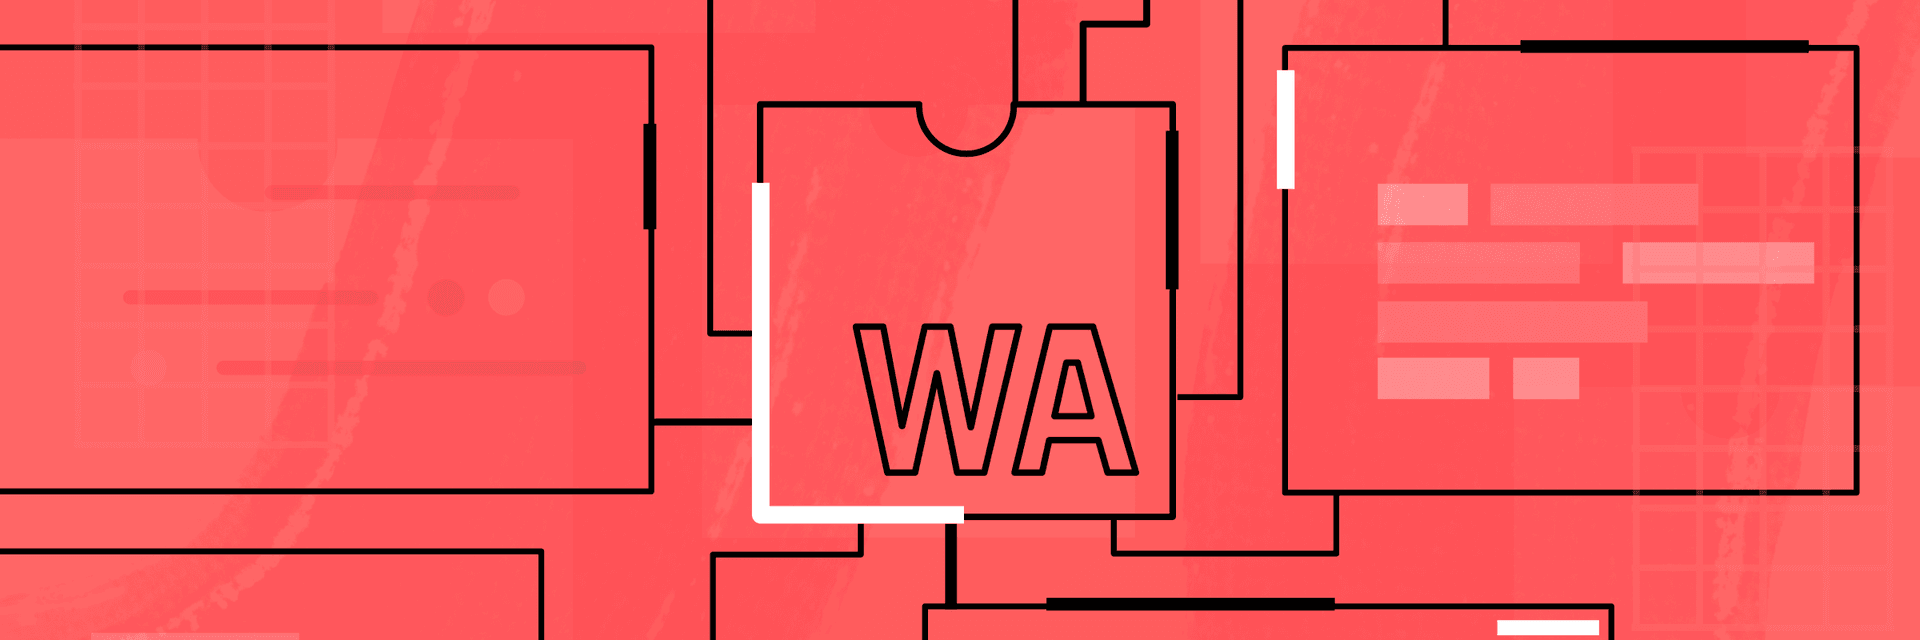 WebAssembly - Running Assembly Code on the Web!